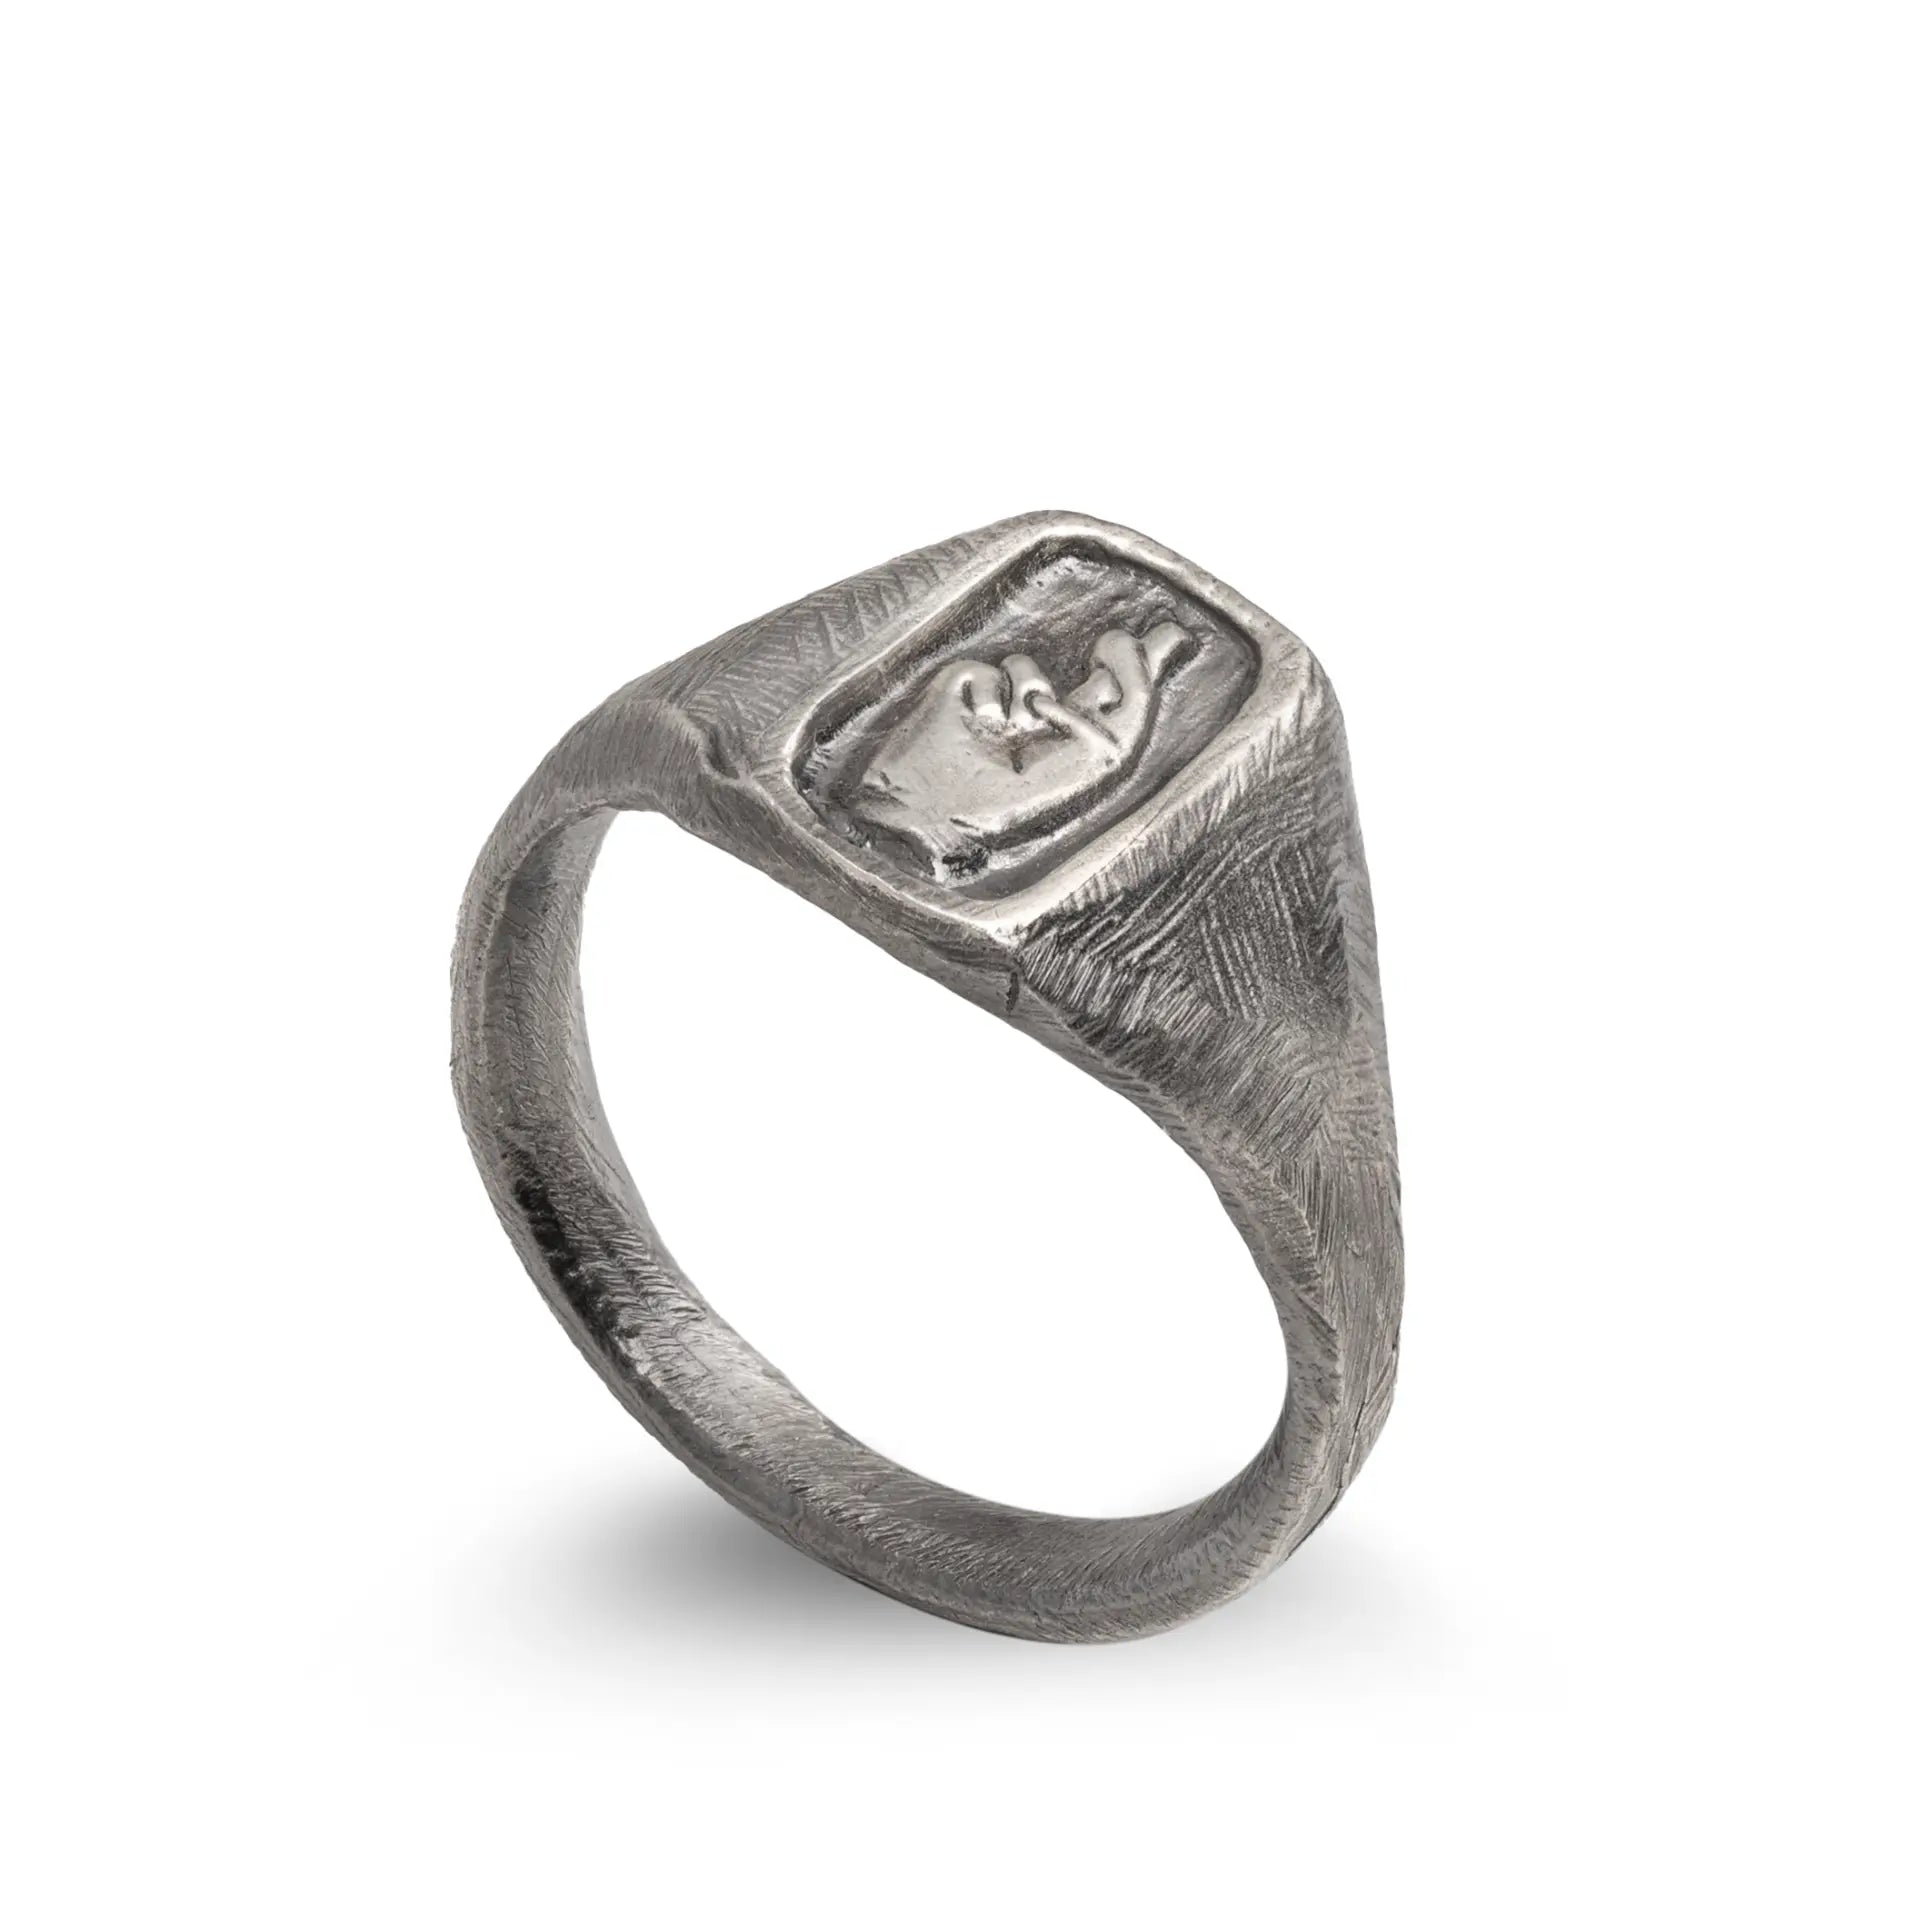 Fingers Crossed Ring Oxidized Silver 925